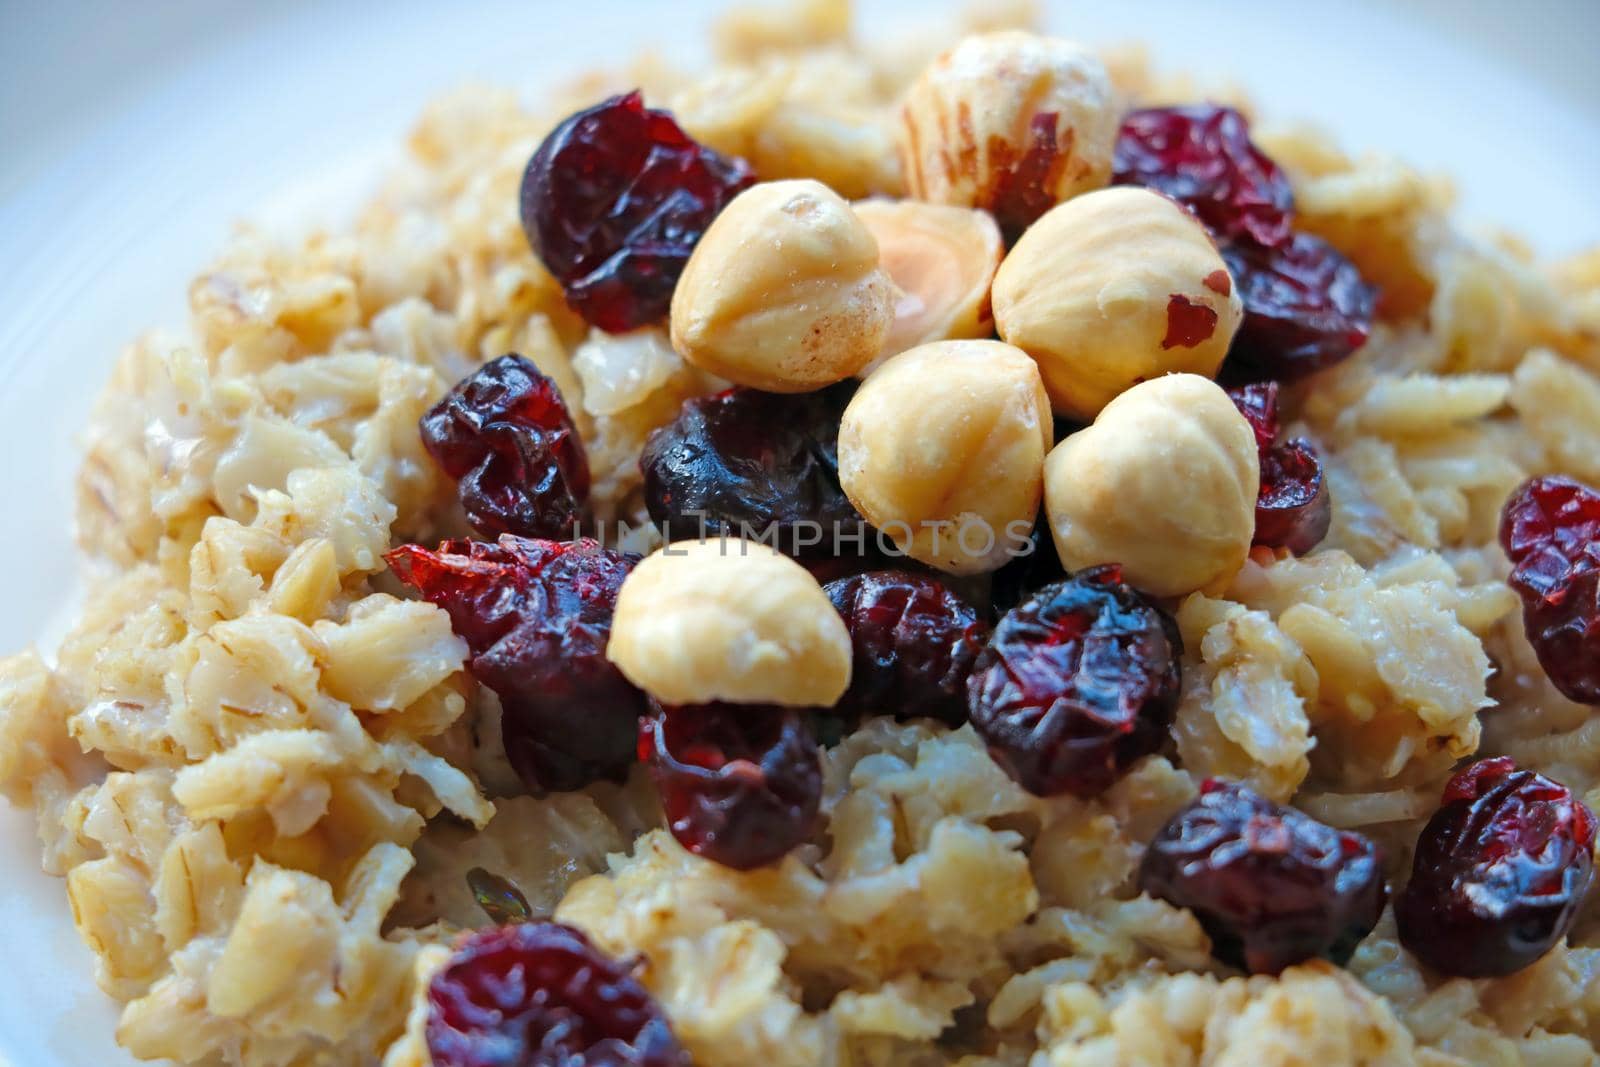 Plate with cooked oatmeal, hazelnuts and cranberries. Healthy food